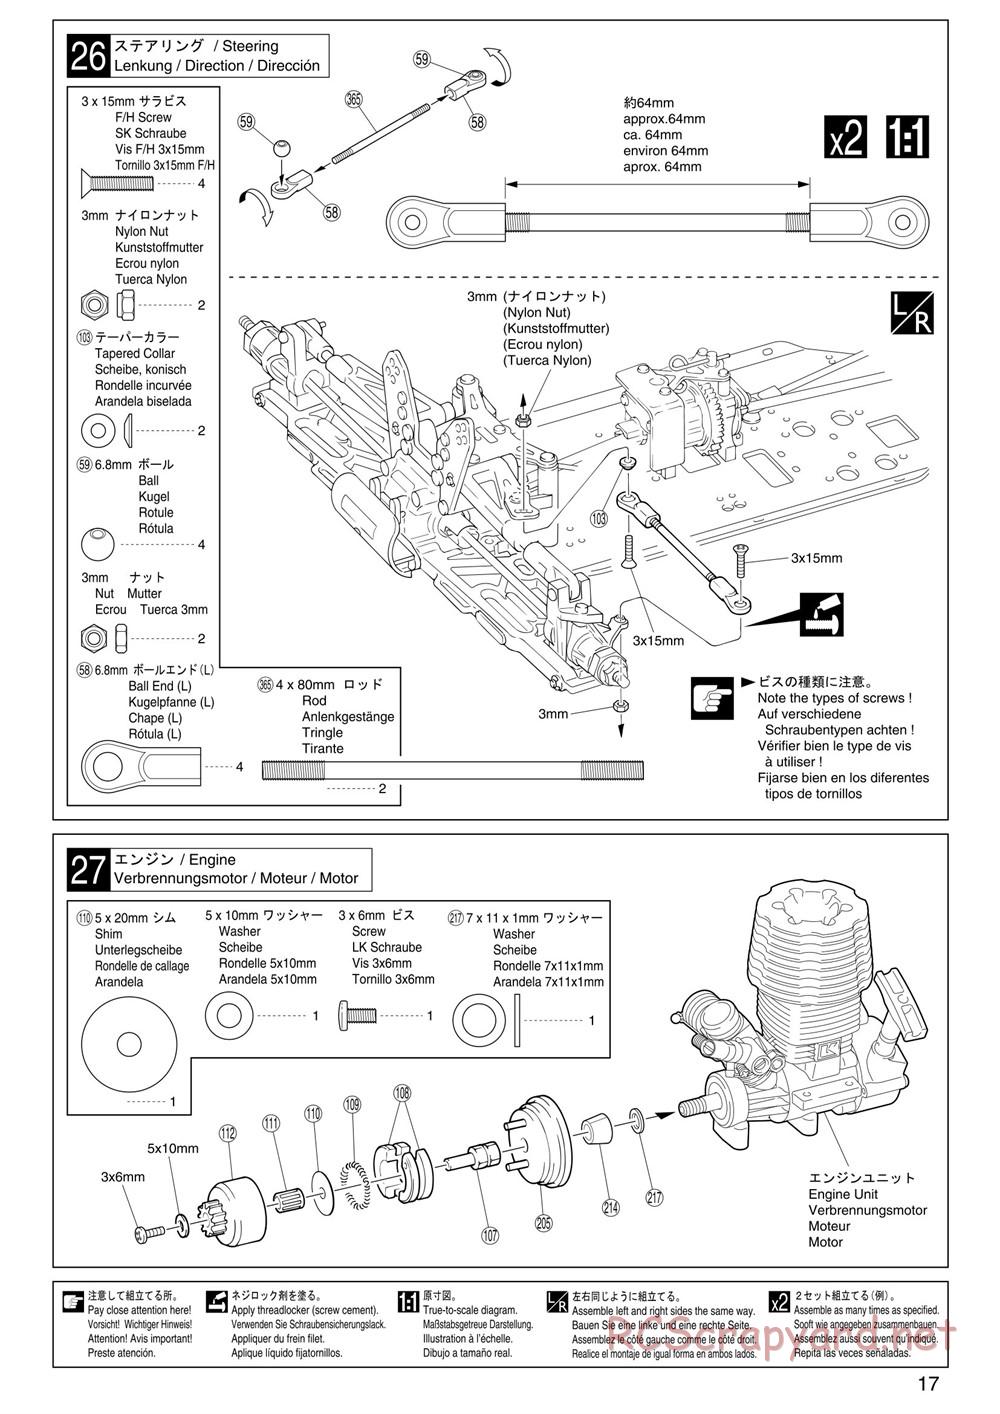 Kyosho - Inferno ST (2005) - Manual - Page 17